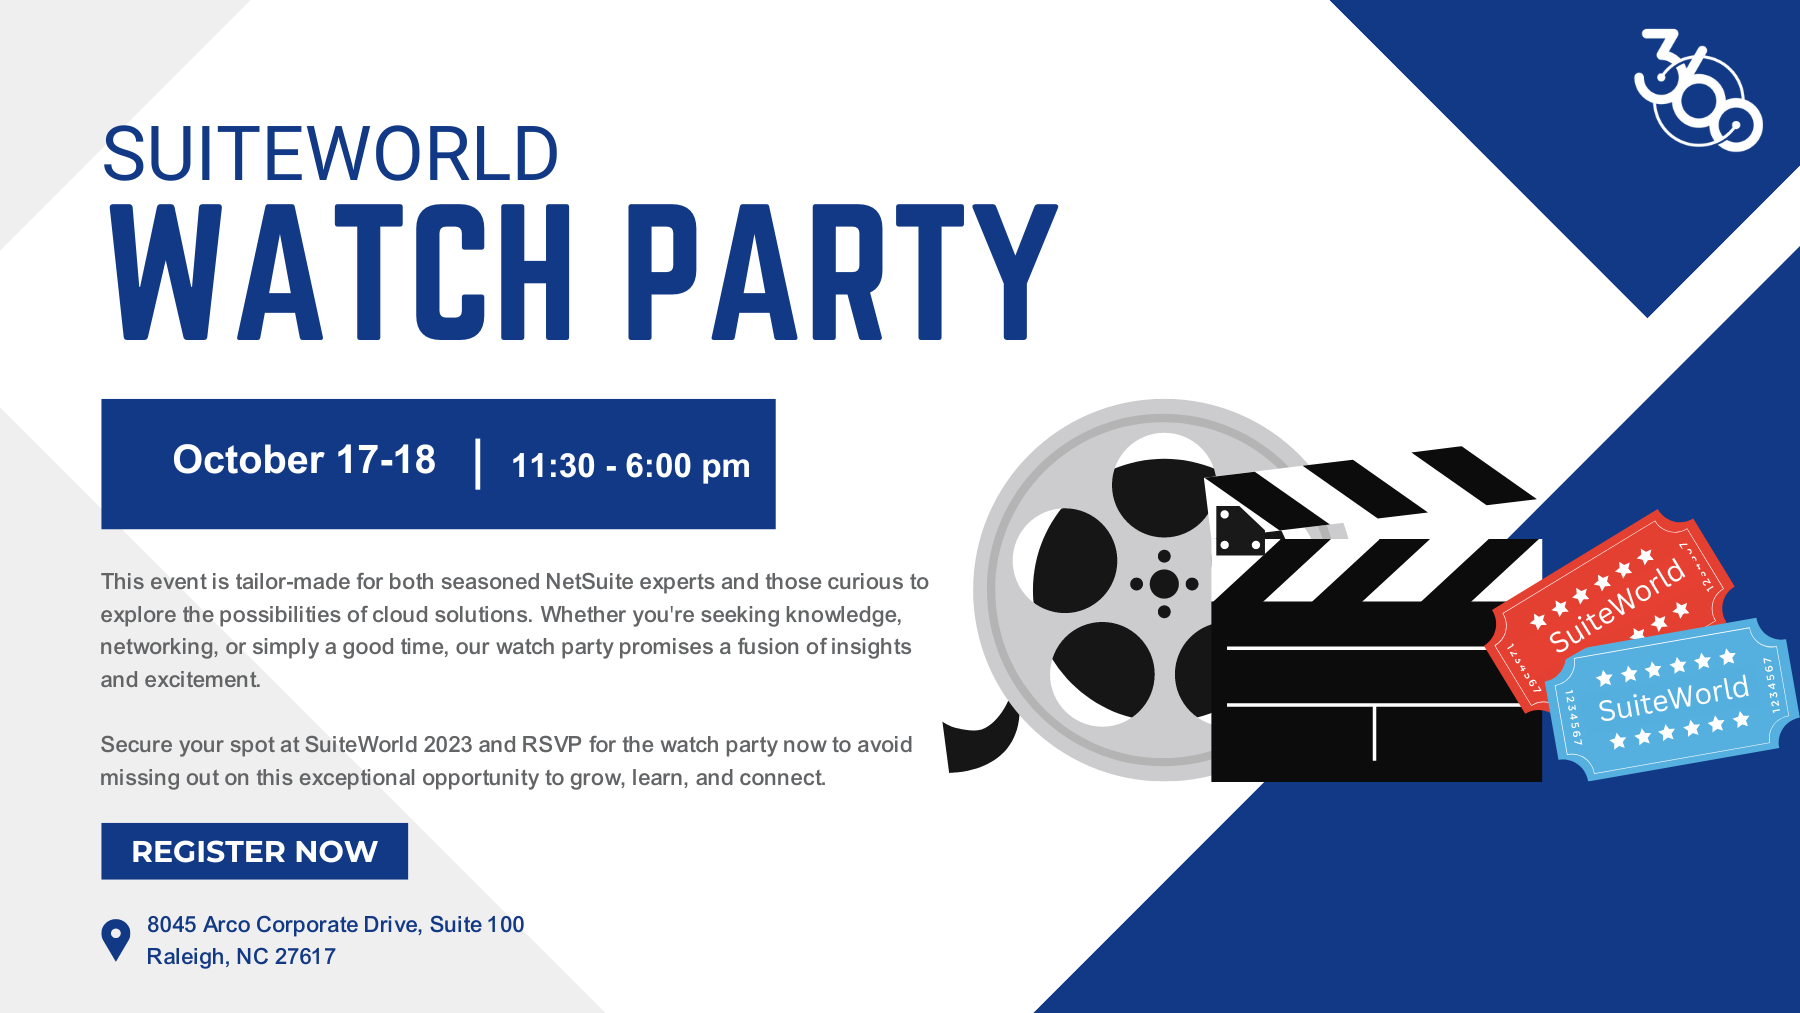 SuiteWorld Watch Party Flyer (2)